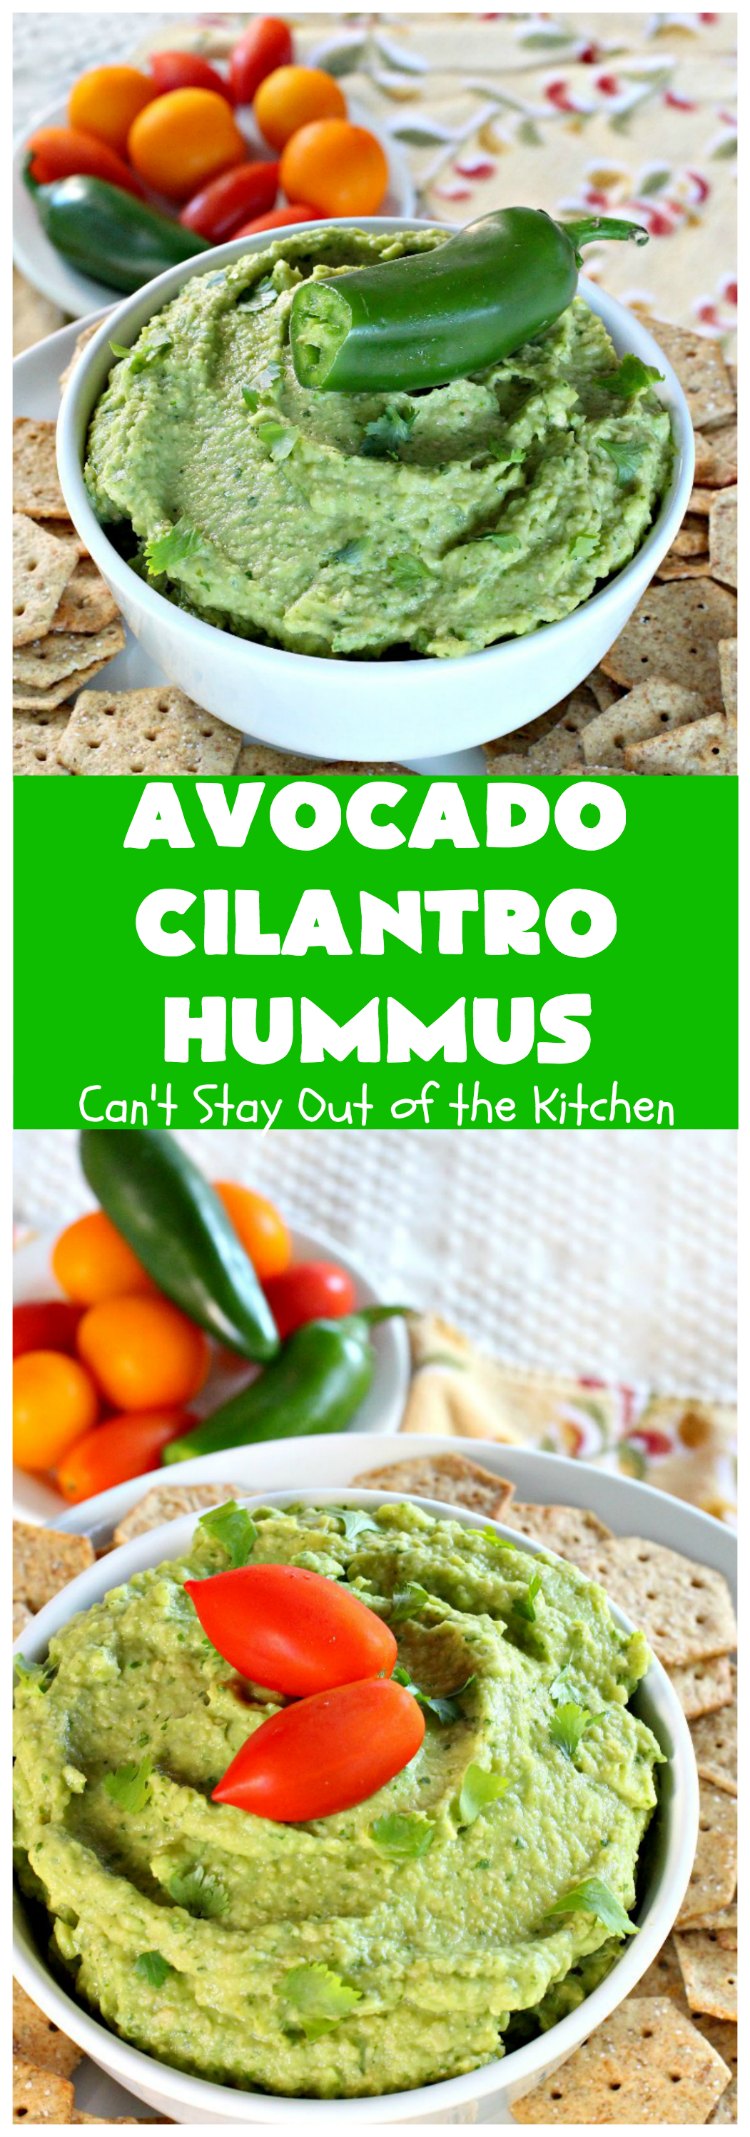 Avocado Cilantro Hummus | Can't Stay Out of the Kitchen